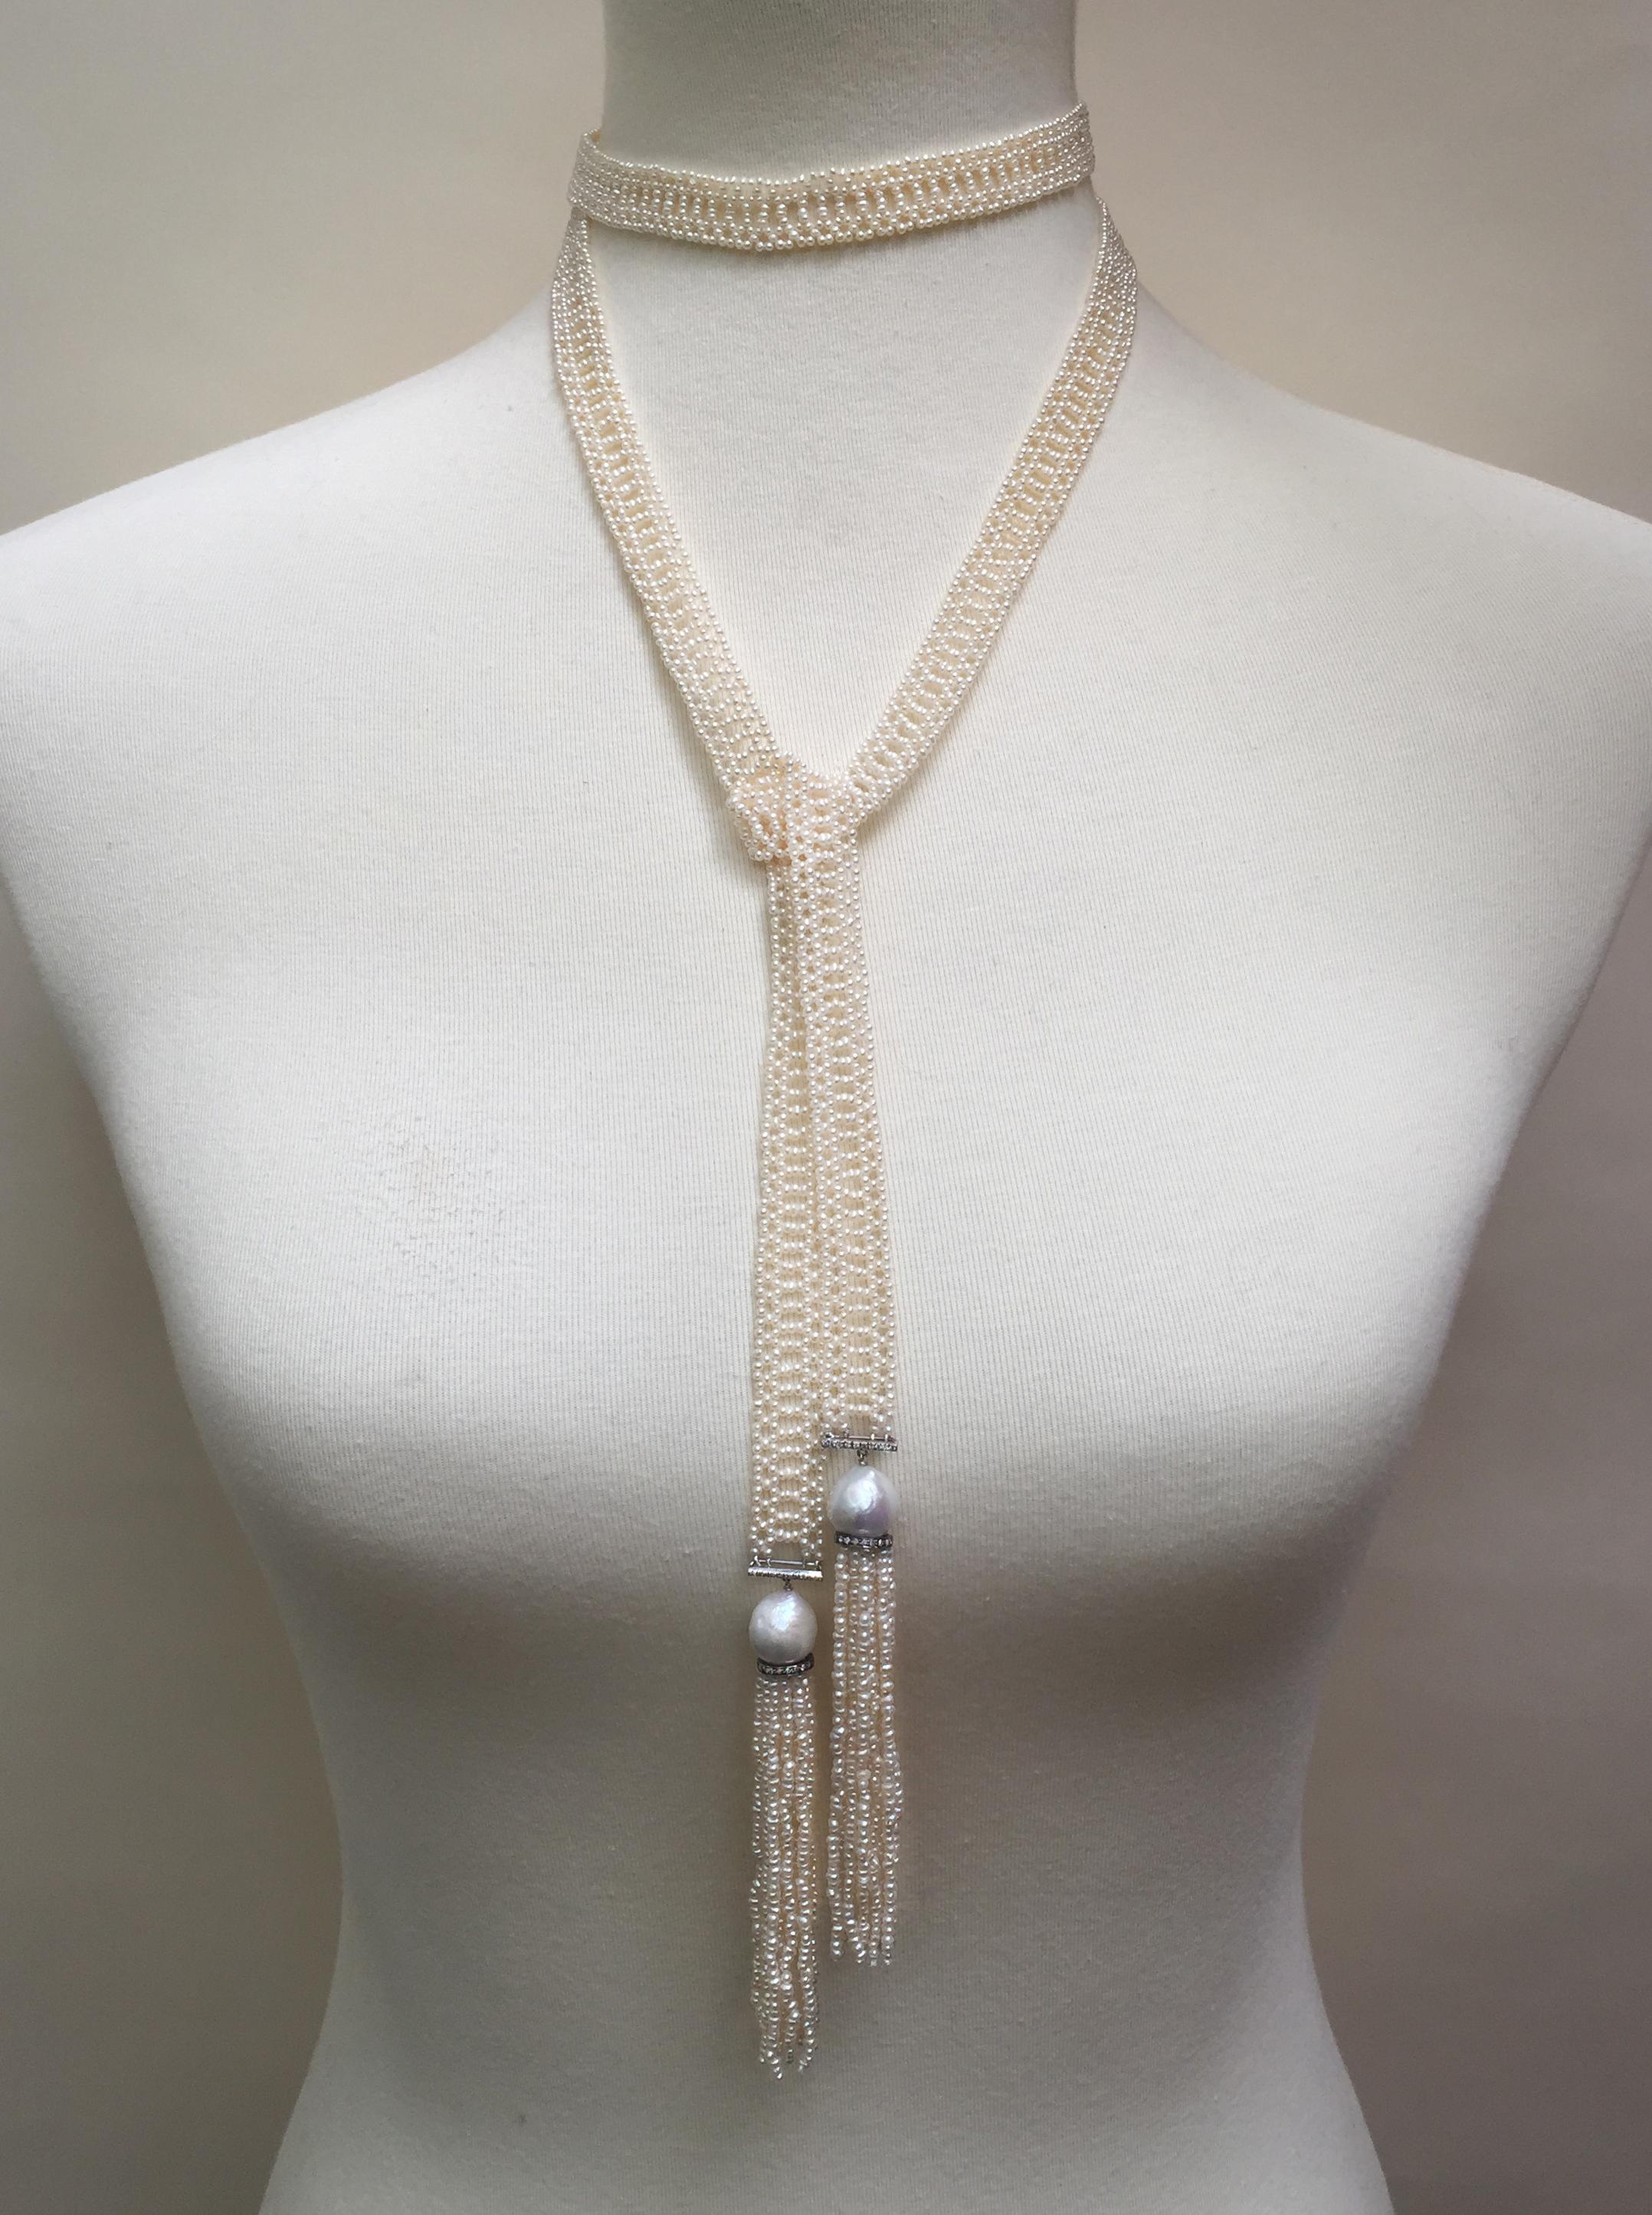 This woven white seed pearl sautoir has elegant pearl tassels accented with diamond encrusted silver roundels and 14k white gold bars with diamonds. The delicate intricately woven lace like design of the sautoir has a grace and luxury to it. At 51